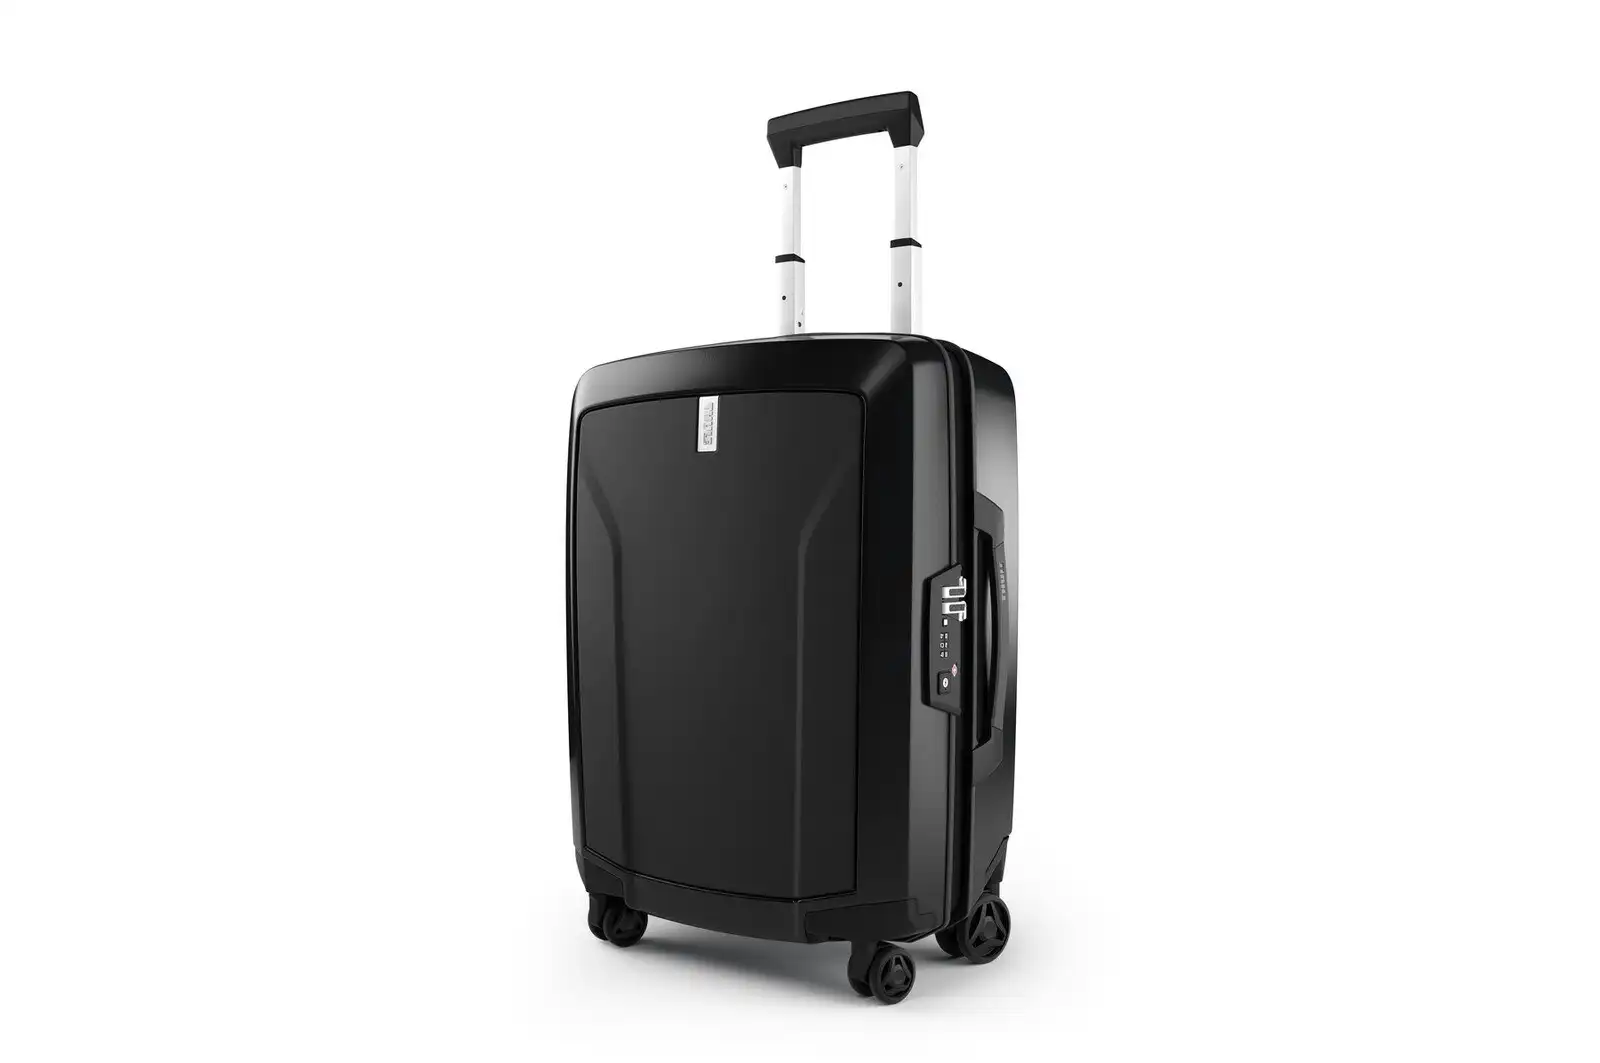 Thule Revolve Wide-Body 55cm/39L Carry On Luggage Travel Trolley Suitcase Black